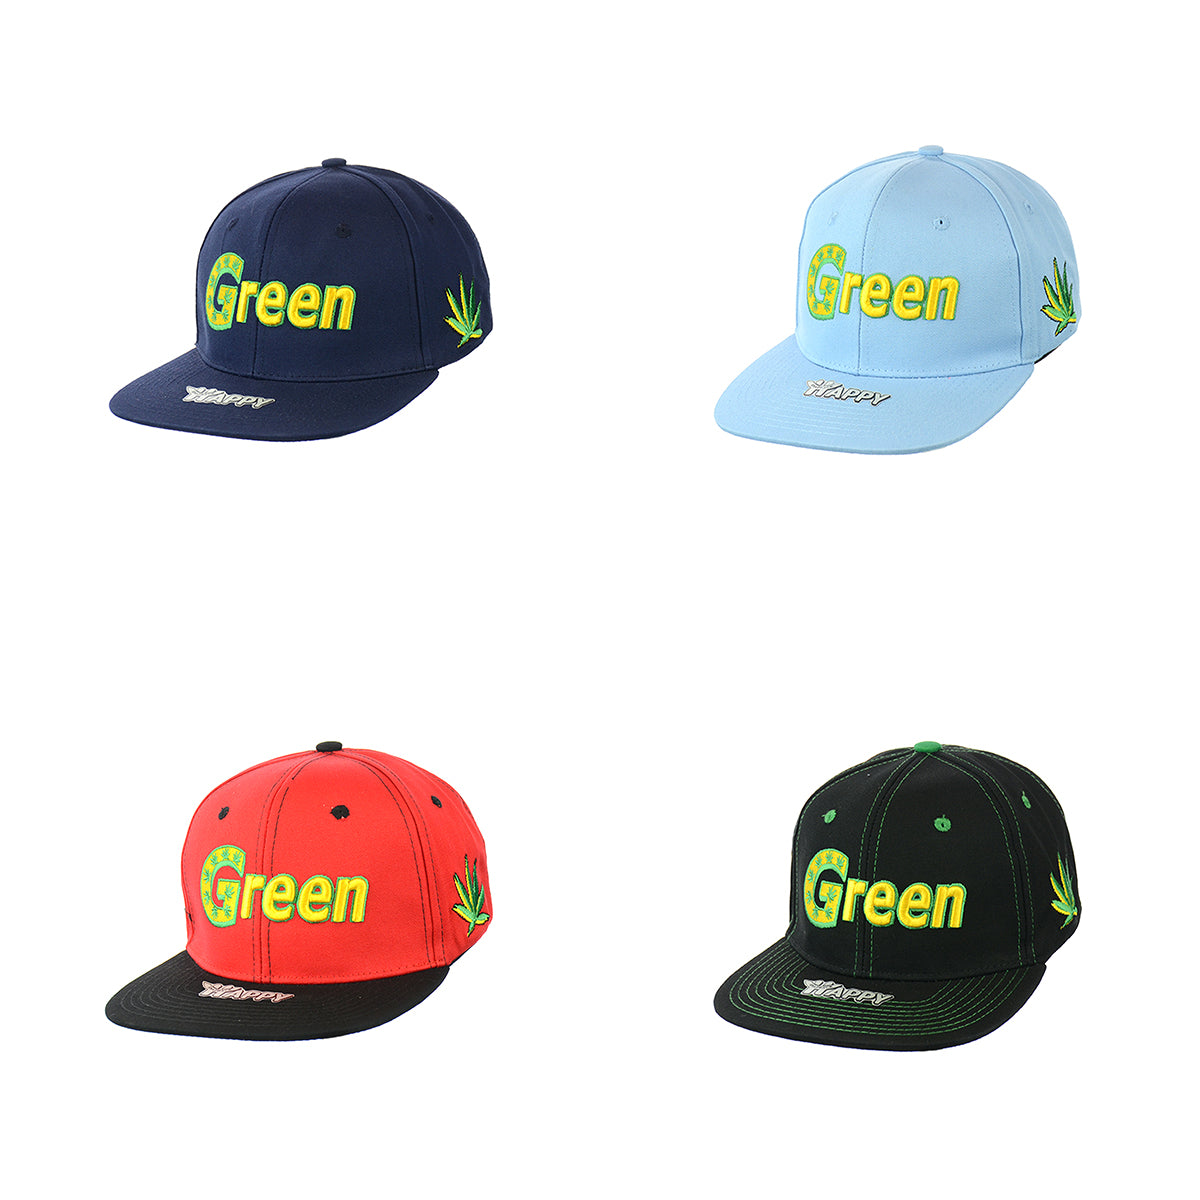 GREEN Embroidered Snapback Hat 100% Cotton